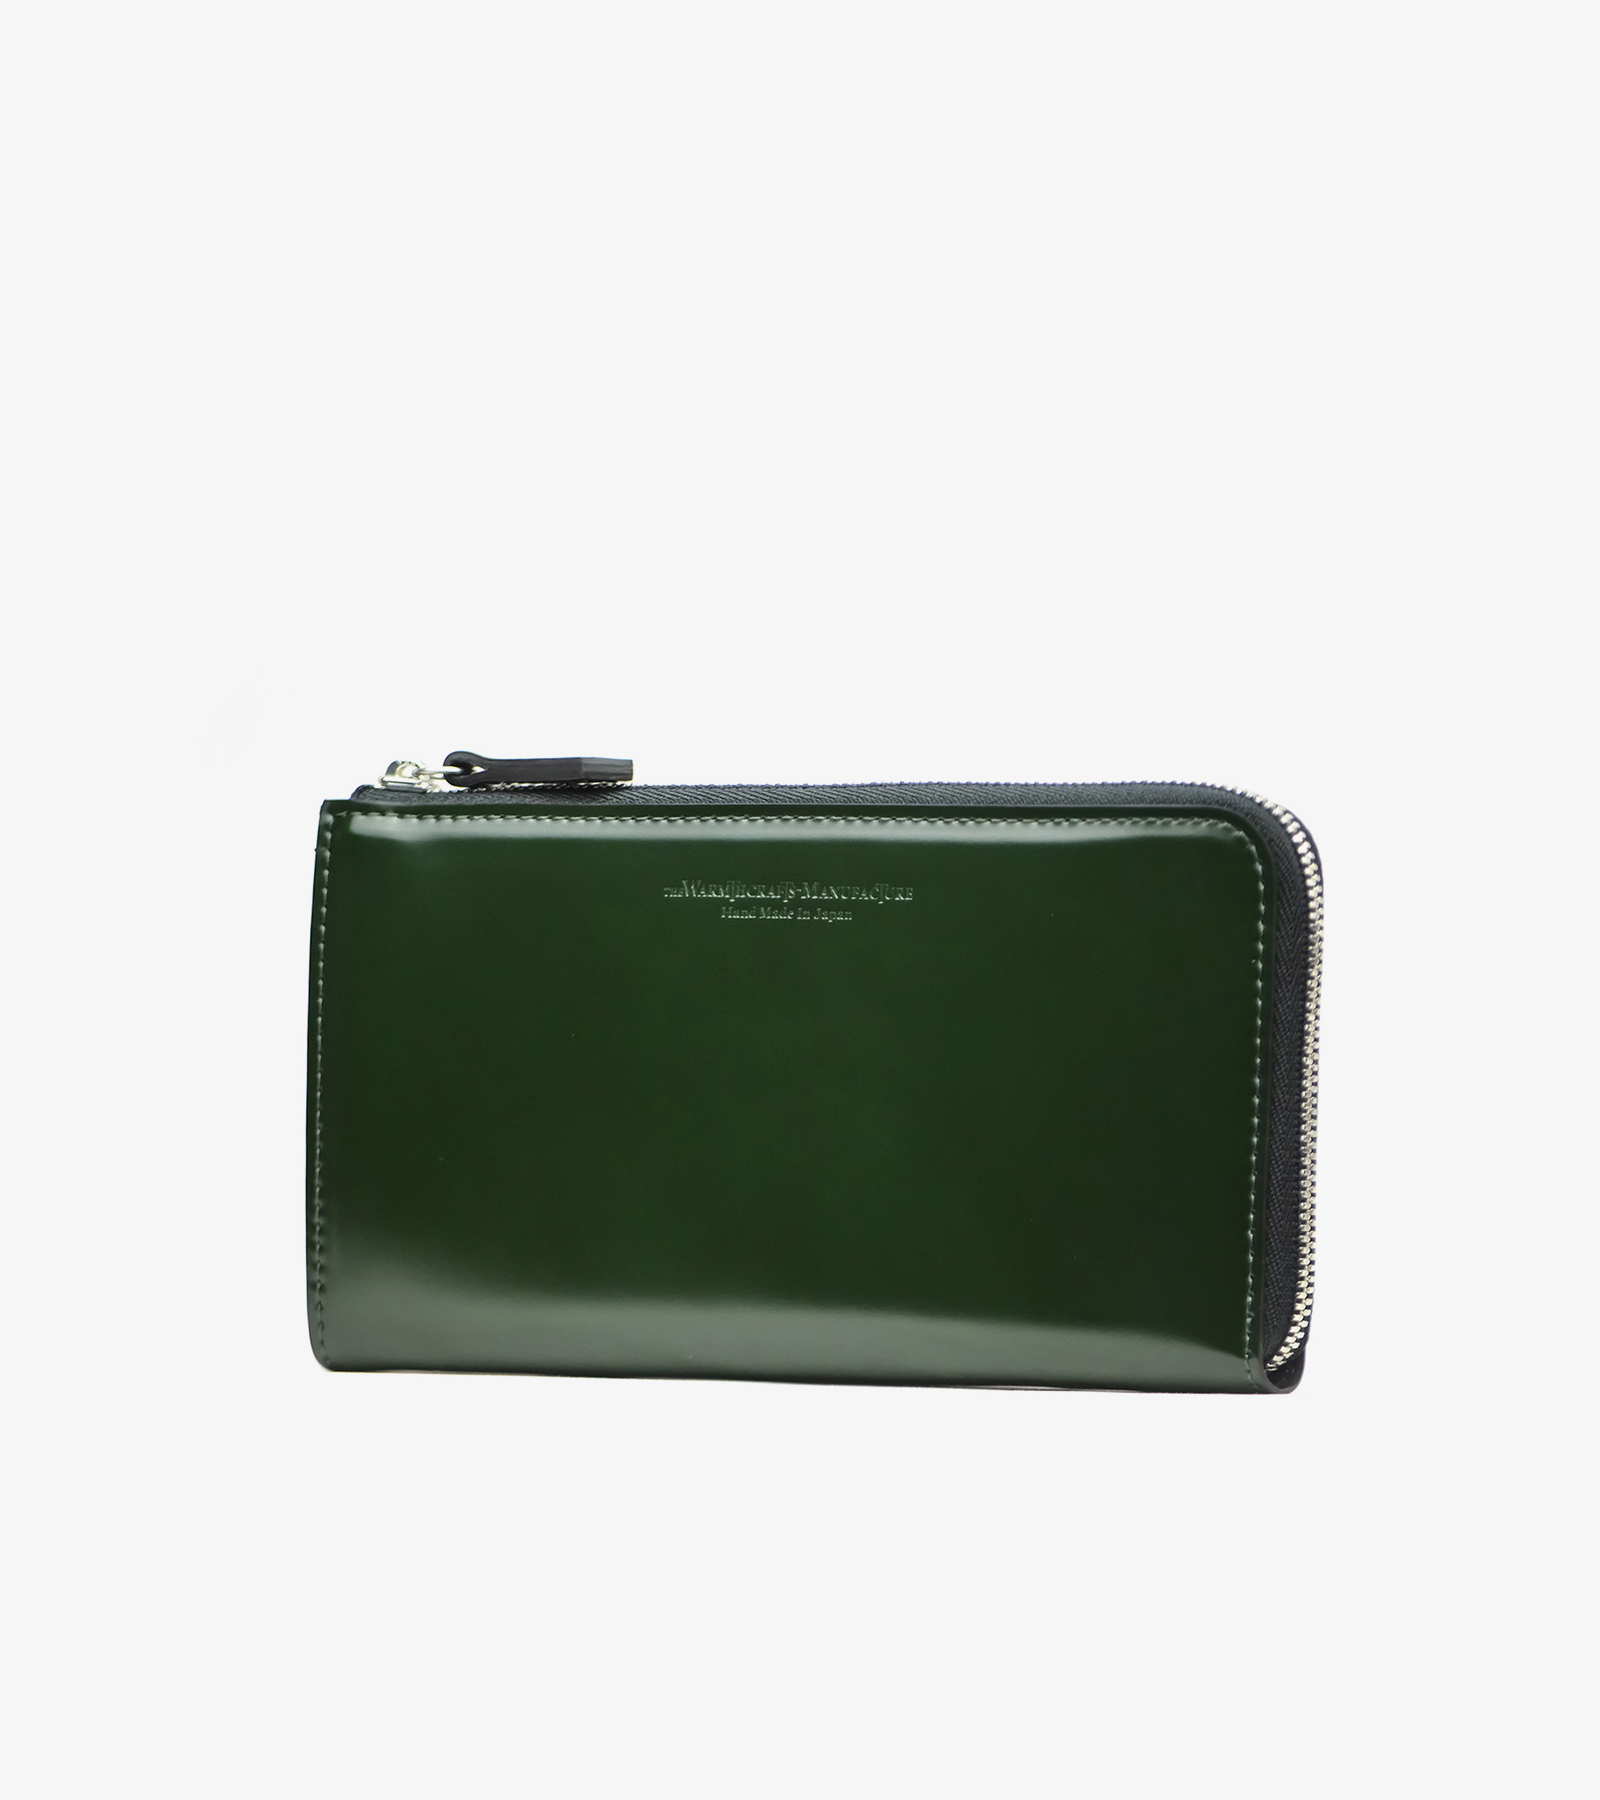 CORDOVAN L-ZIPPED SLIM WALLET / The Warmthcrafts Manufacture Web Store